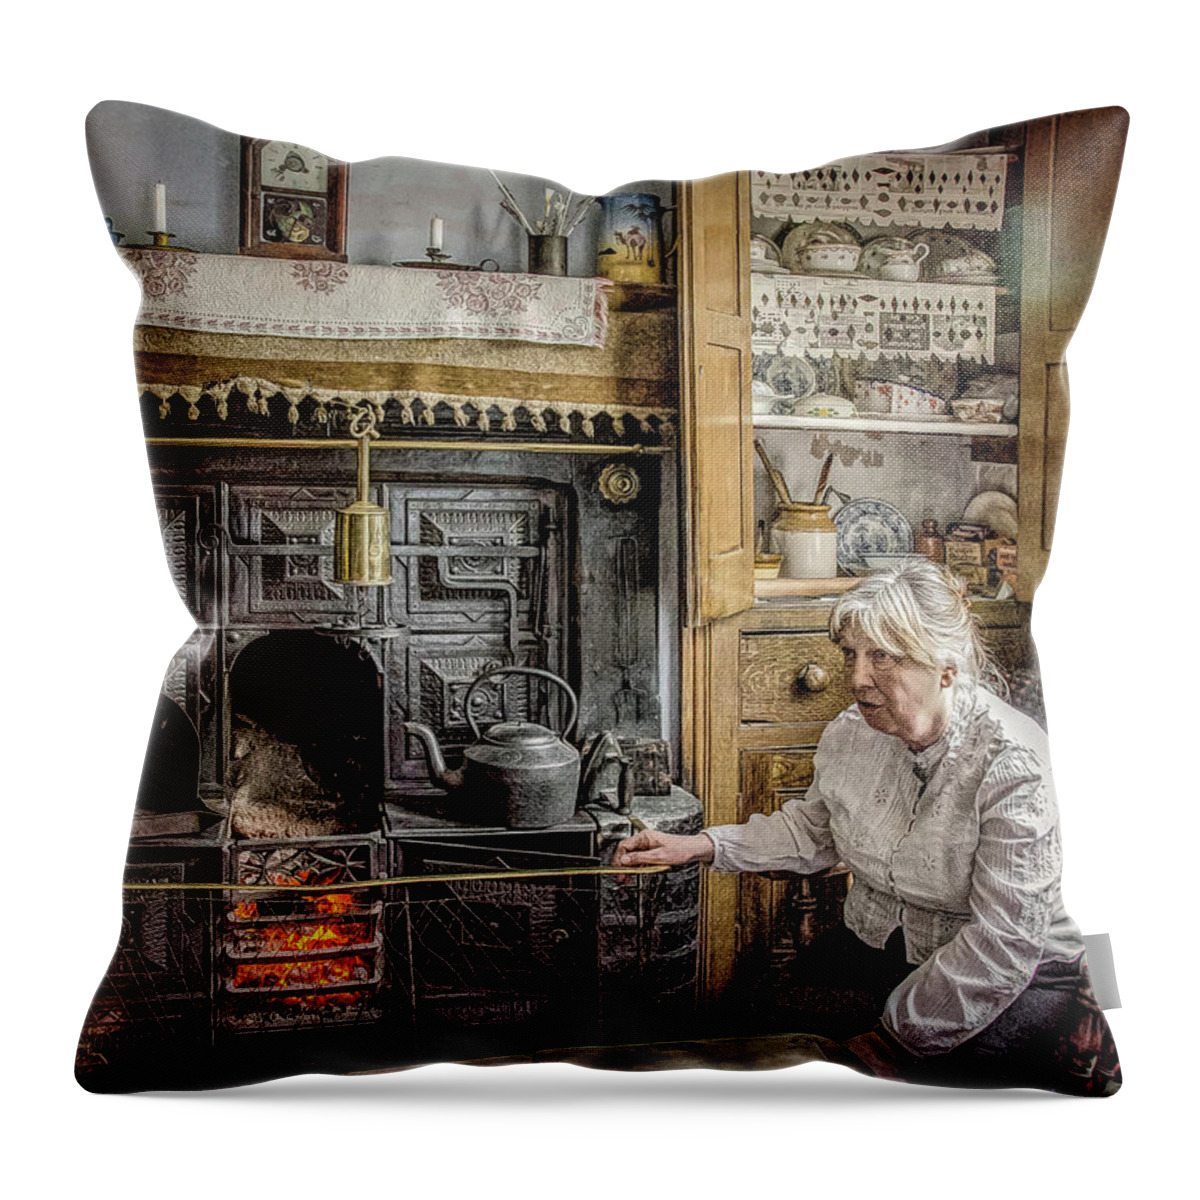 Grate Throw Pillow featuring the photograph Grandma's Grate by Brian Tarr